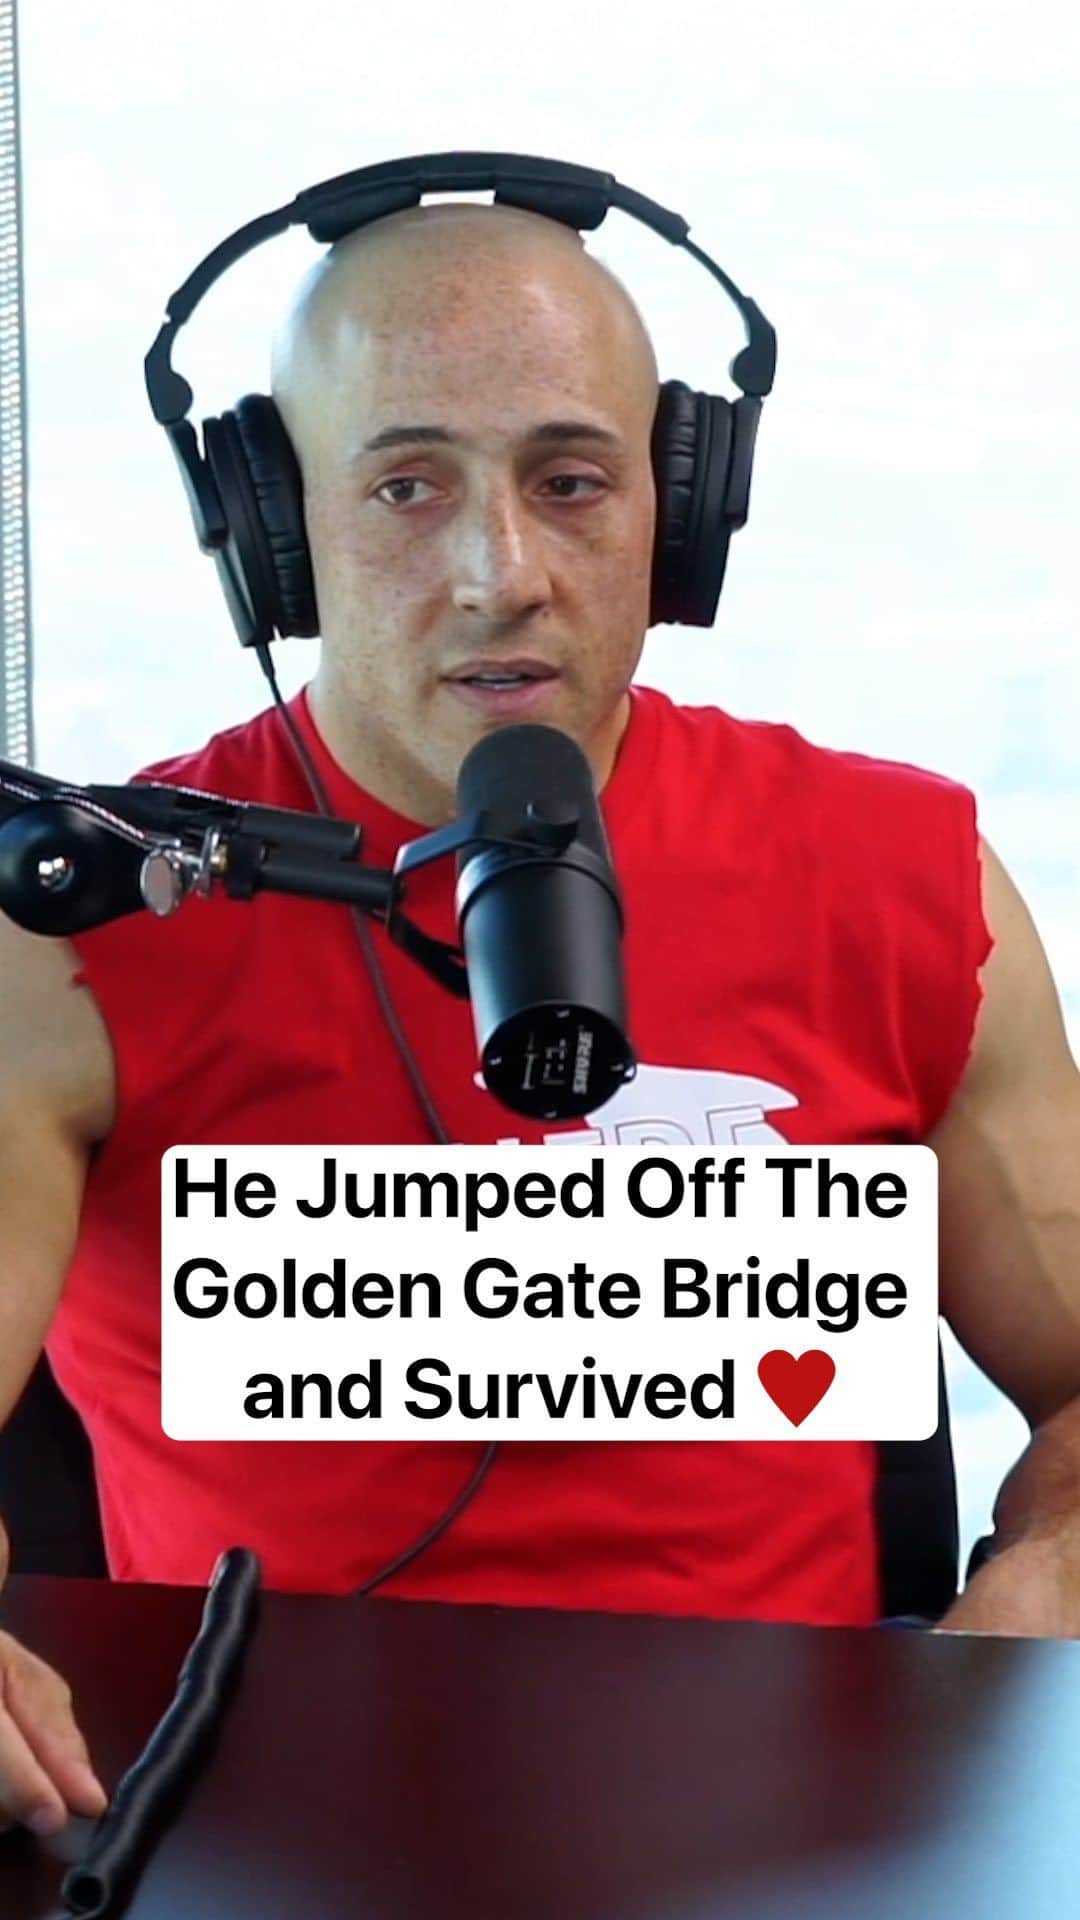 Mark Dohnerのインスタグラム：「23 years ago this month, Kevin Hines jumped off the Golden Gate Bridge in an attempt to take his own life. Where 2,000 people have died, Kevin got to live. He is 1 of 35 survivors. This is his story. ♥️ @kevinhinesstory」